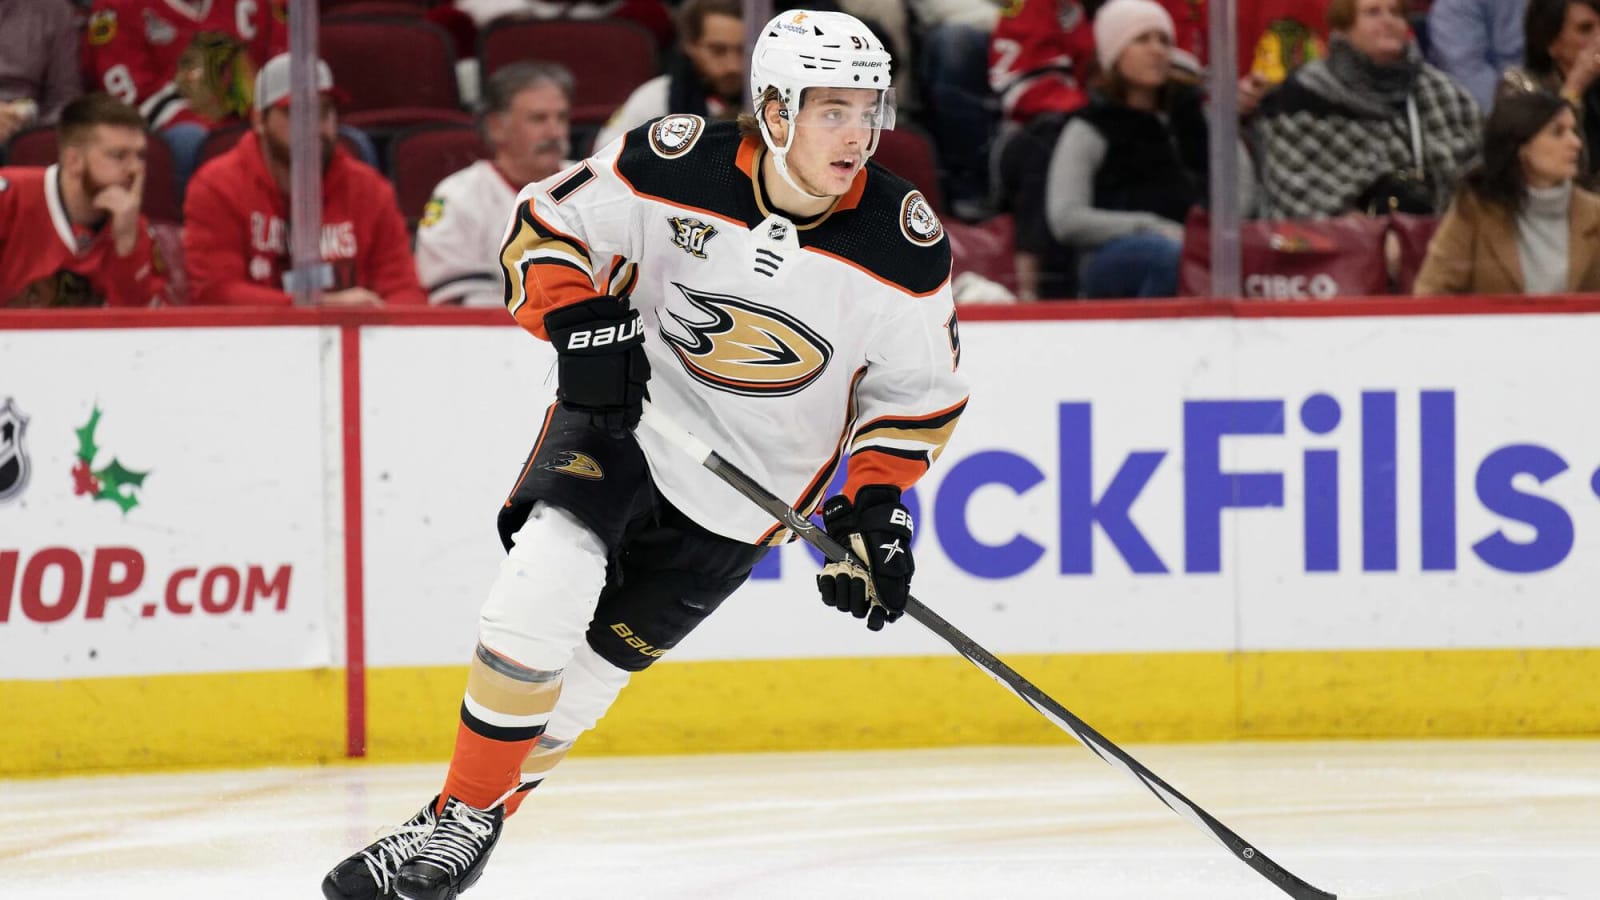 Ducks center Leo Carlsson leaves game against Flames with apparent lower-body injury